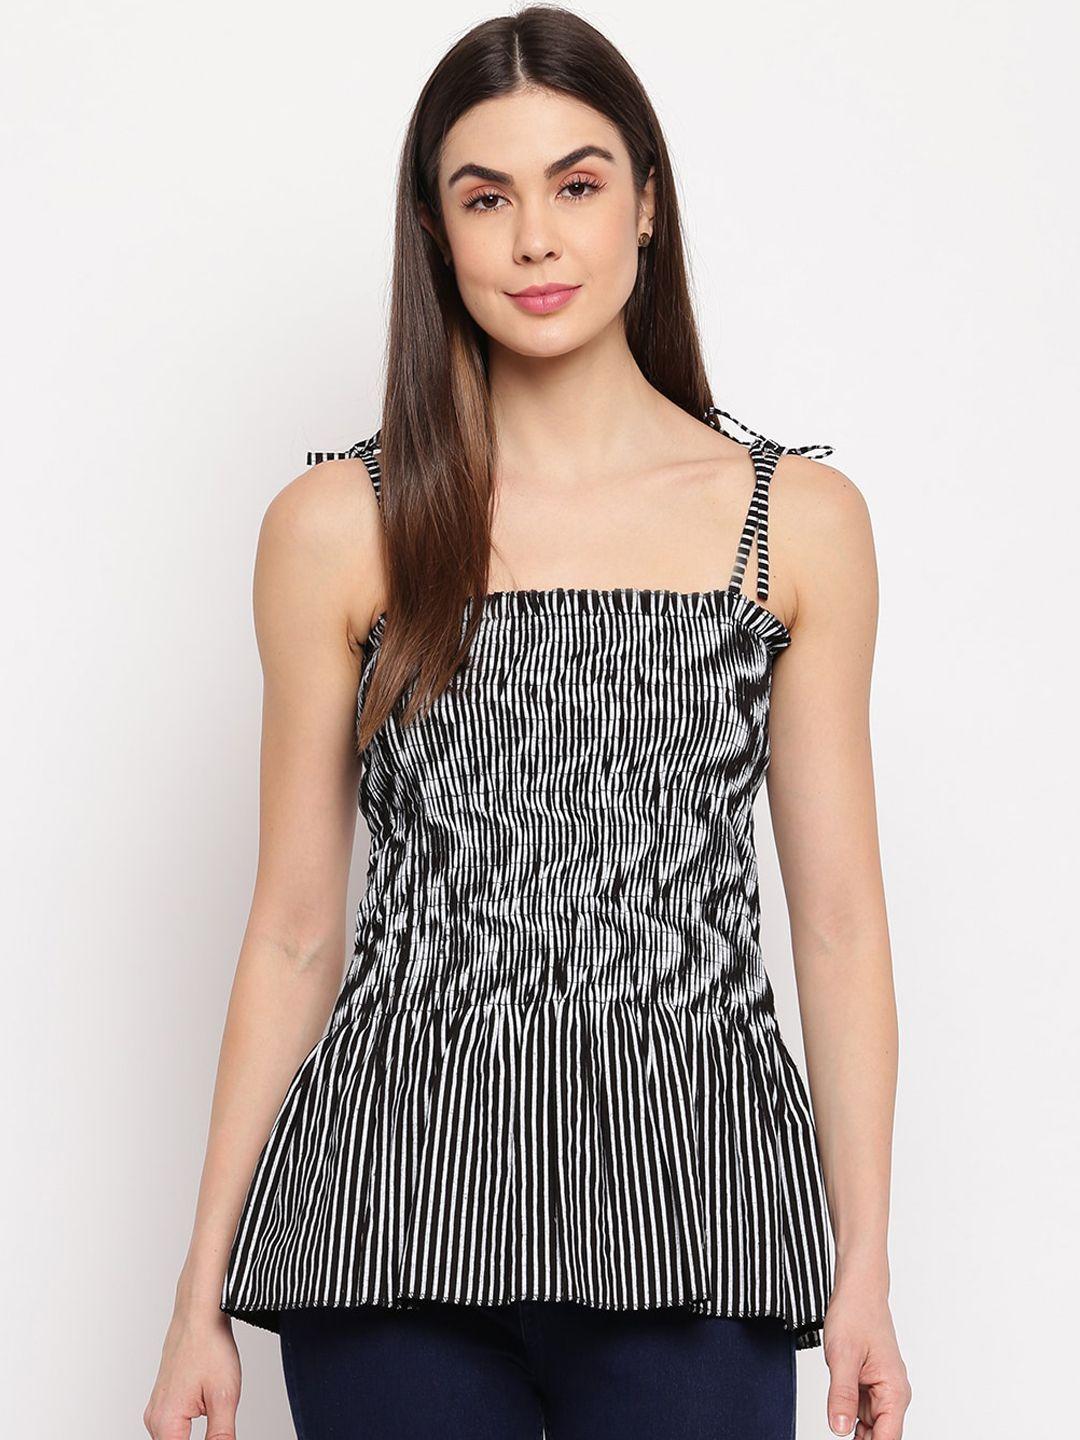 aawari silver-toned & black striped cinched waist top